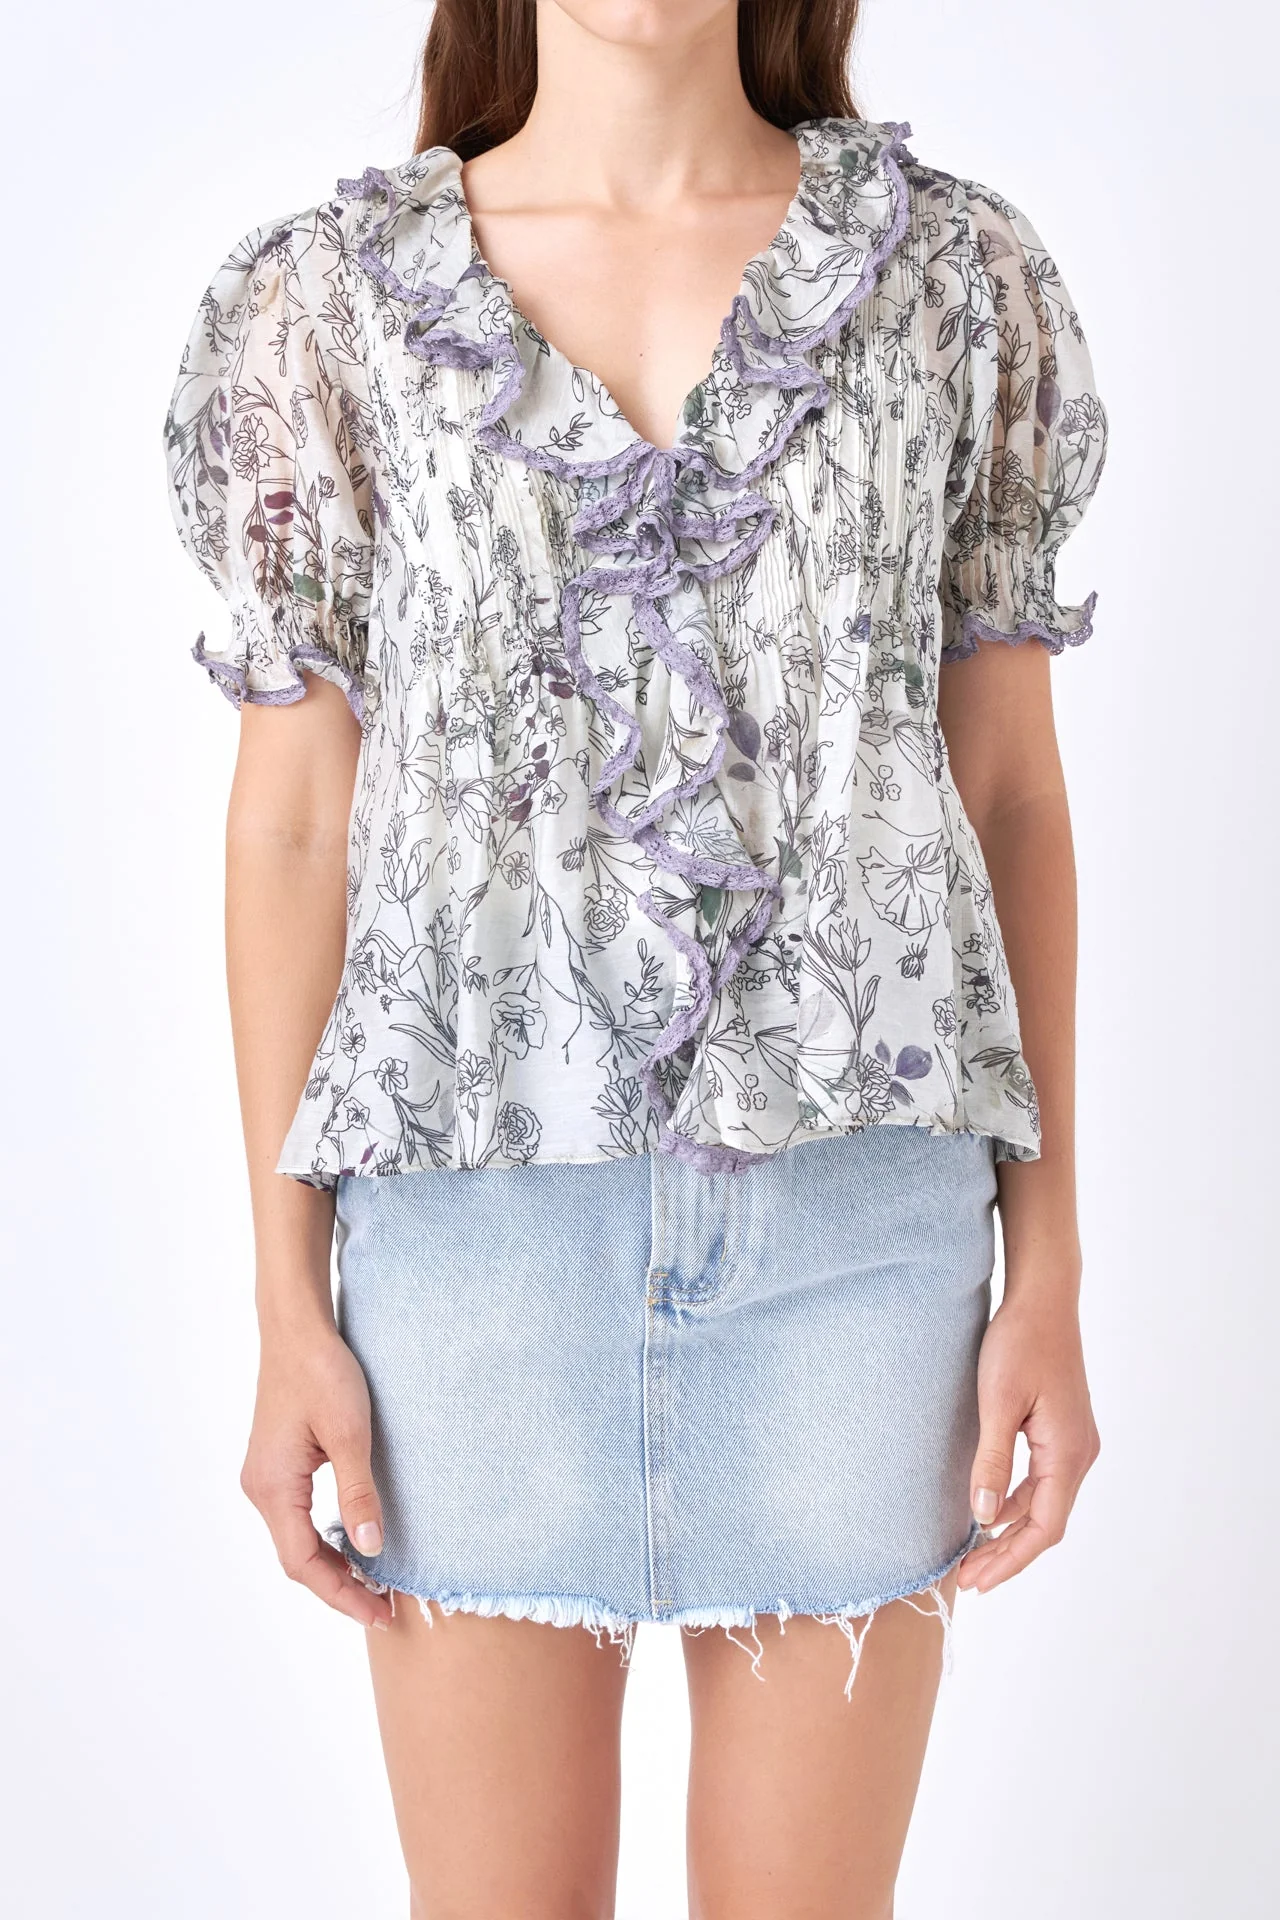 CARY ABSTRACT FLORAL PRINT RUFFLE TOP IN IVORY MULTI